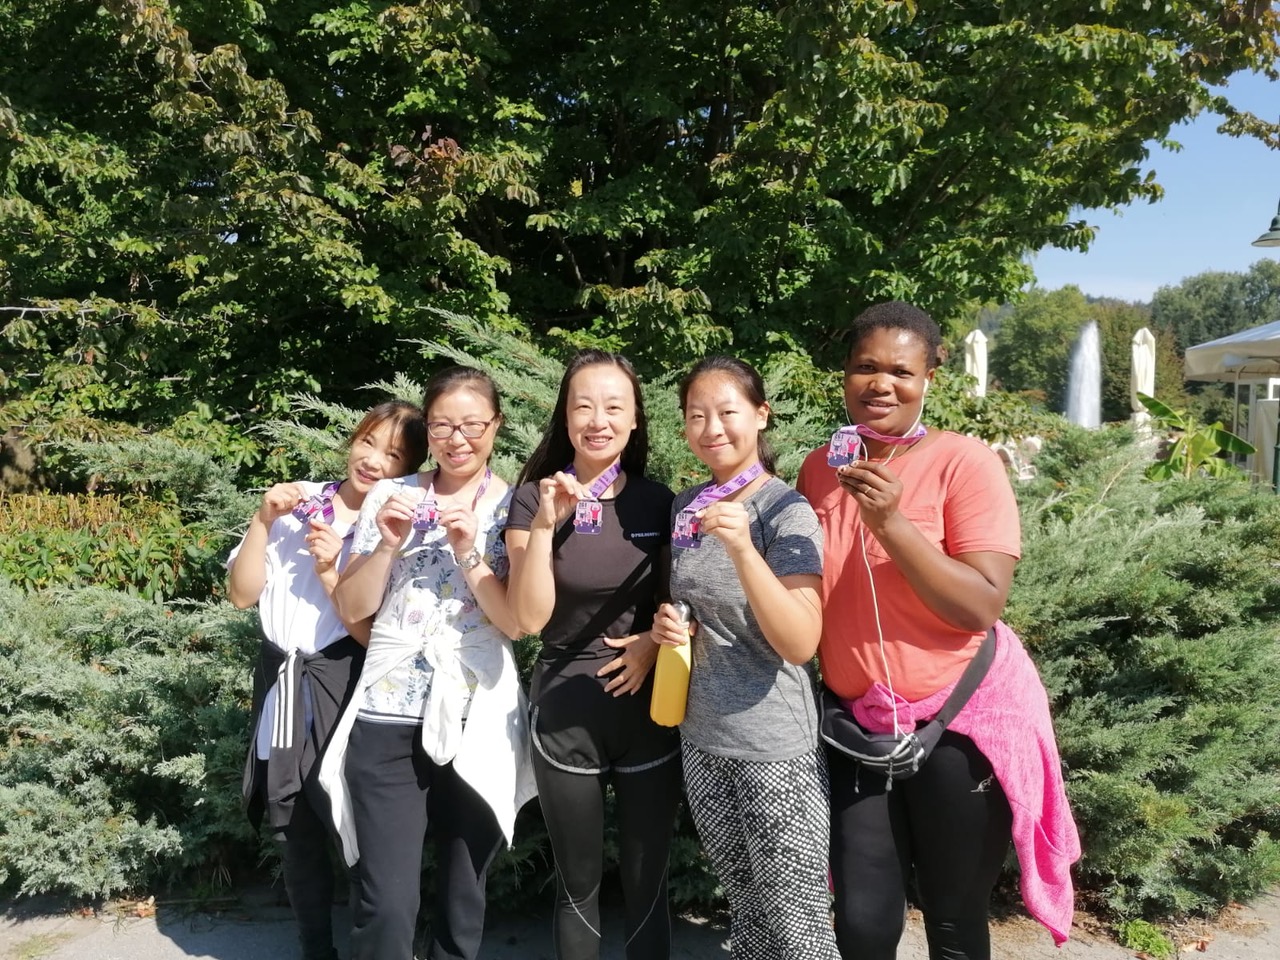 Group of women of different ethnicities, members of the 261 Fearless running group, proudly display their medals in a park-like area